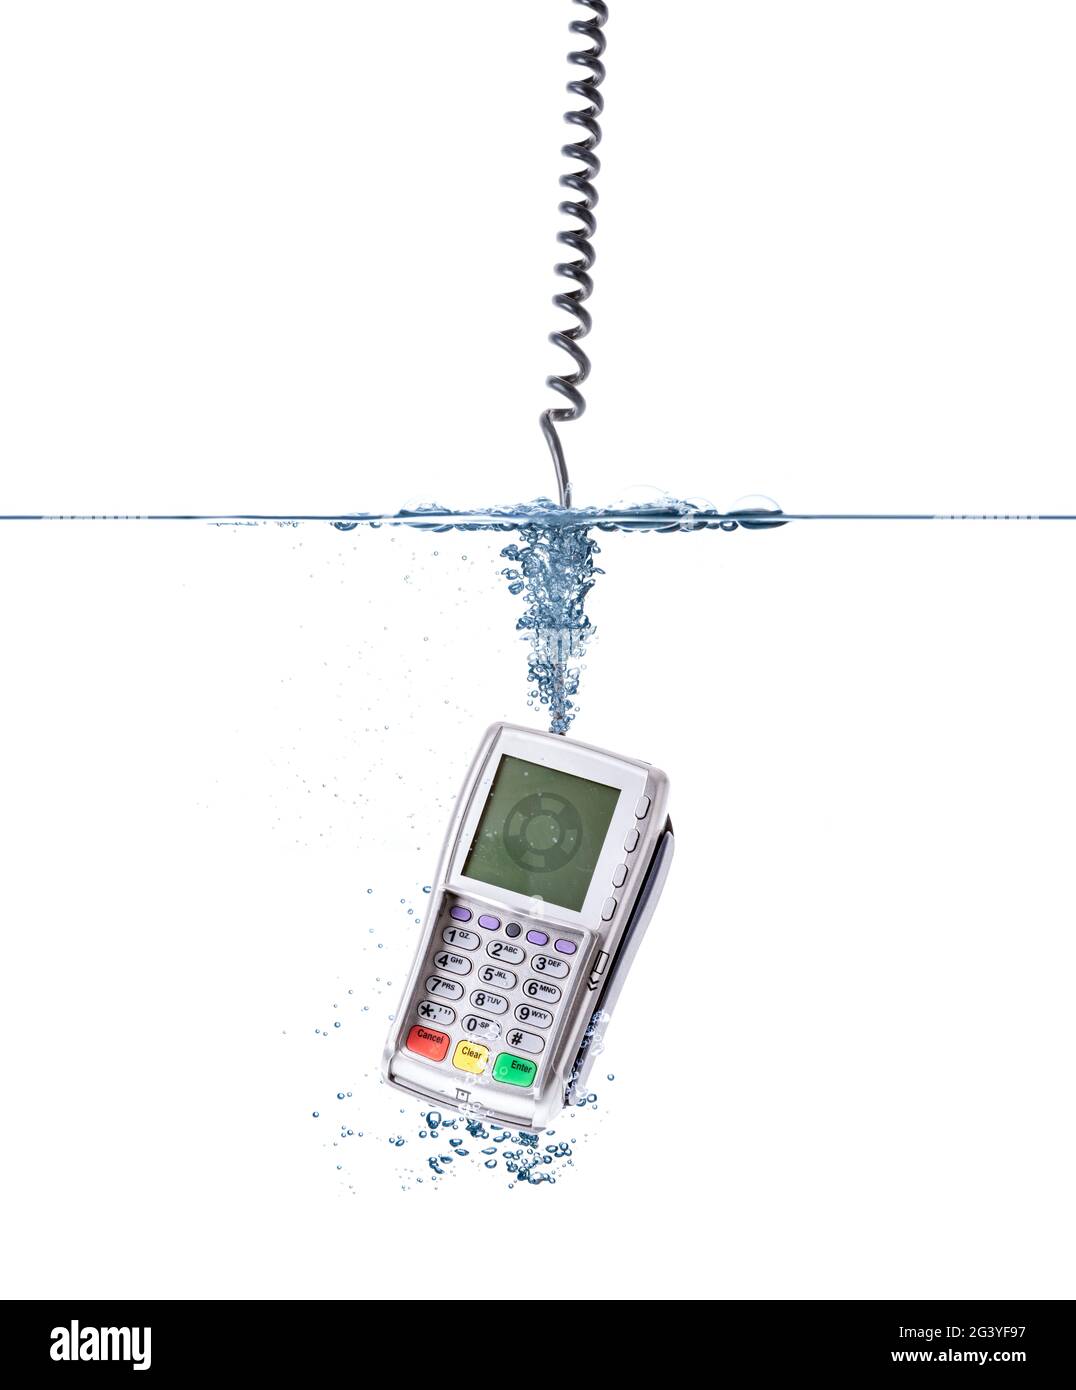 Credit card terminal with lifebelt symbol on screen splashing into clear water Stock Photo